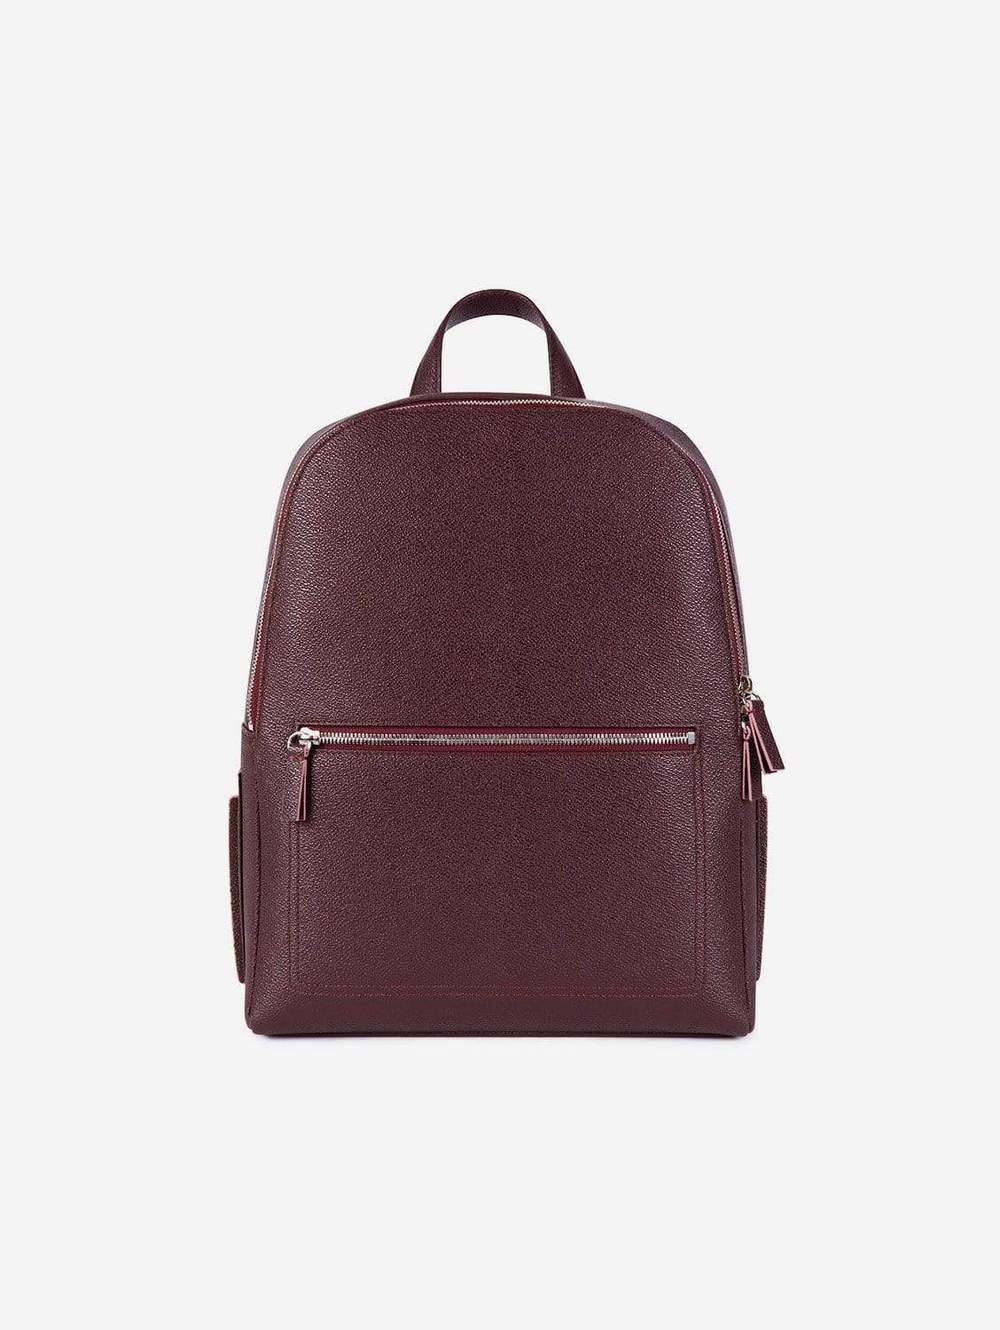 Backpack made from vegan apple leather